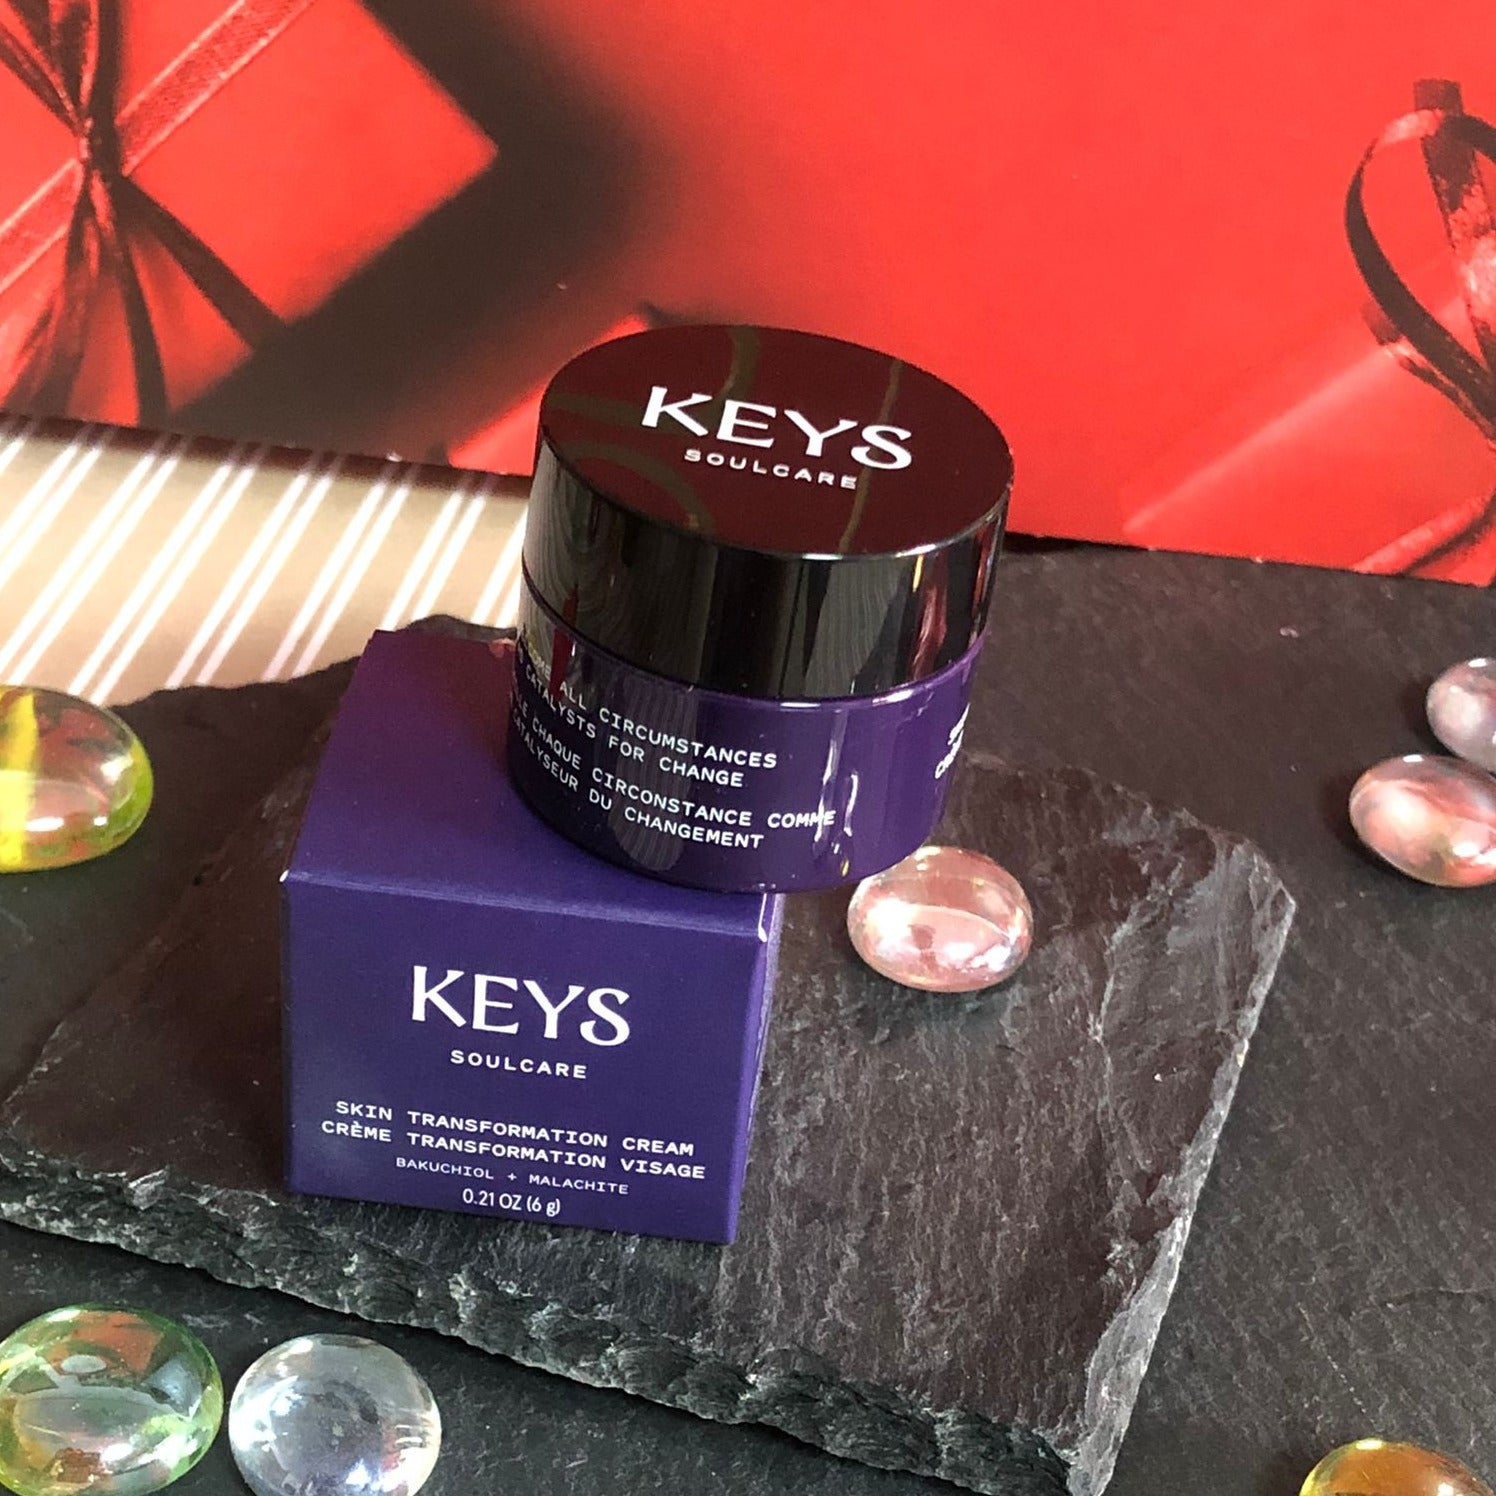 A hydrating and moisturizing face cream that helps reveal plumped and radiant-looking skin with bakuchiol, malachite, ceramides, and hyaluronic acid.